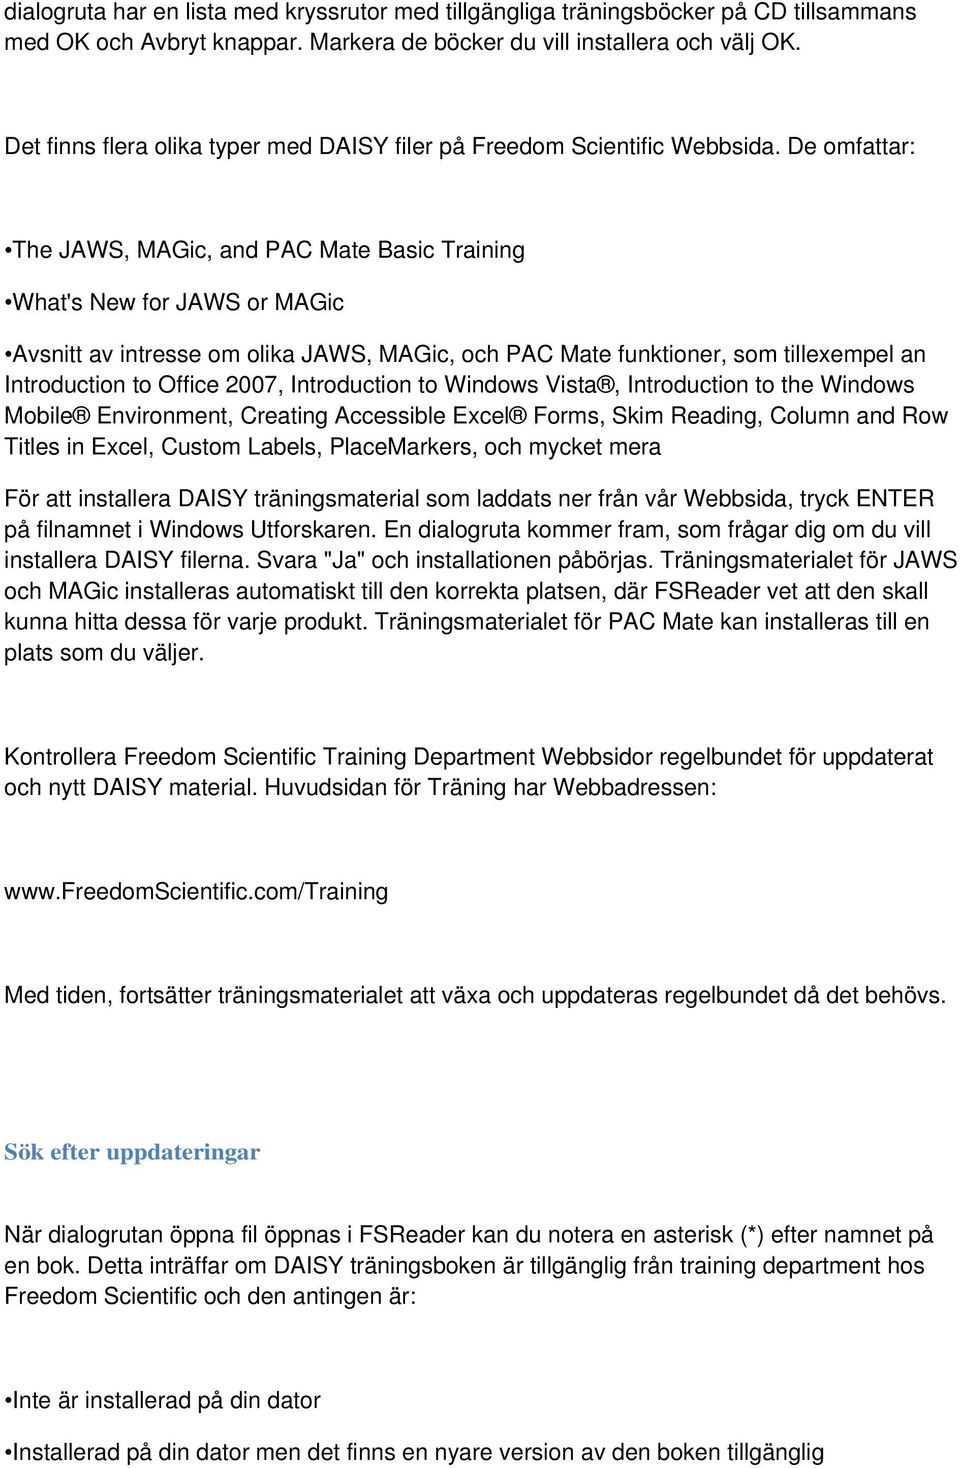 De omfattar: The JAWS, MAGic, and PAC Mate Basic Training What's New for JAWS or MAGic Avsnitt av intresse om olika JAWS, MAGic, och PAC Mate funktioner, som tillexempel an Introduction to Office